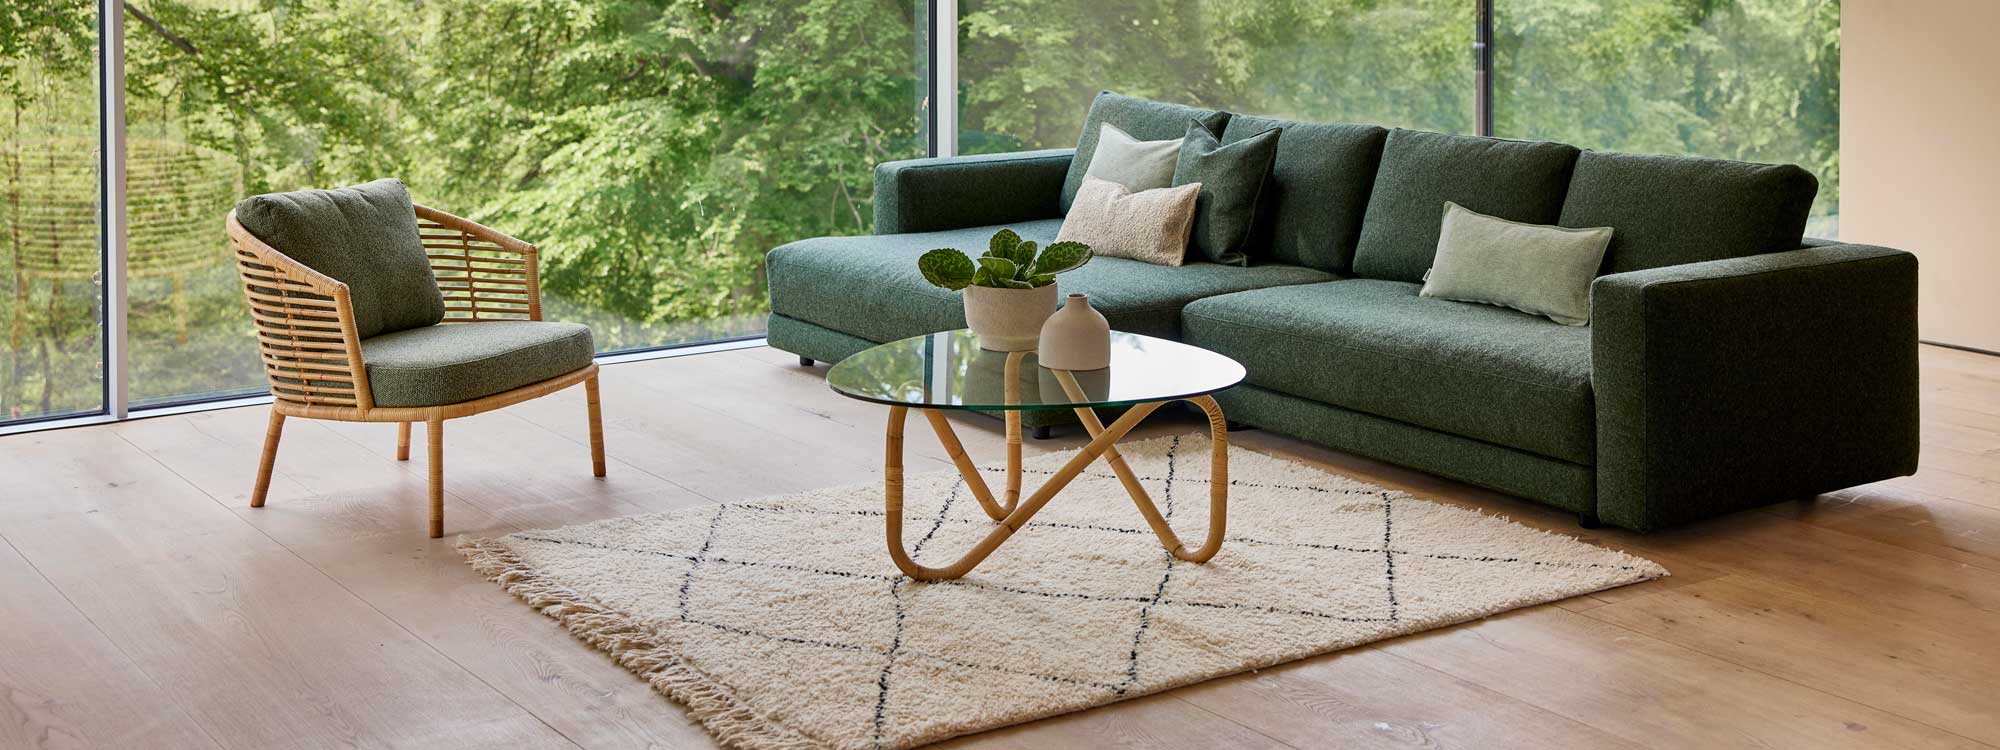 Image of Scale twin sofa and daybed in Dark-green Cane-line Zen fabric with Wave coffee table in front